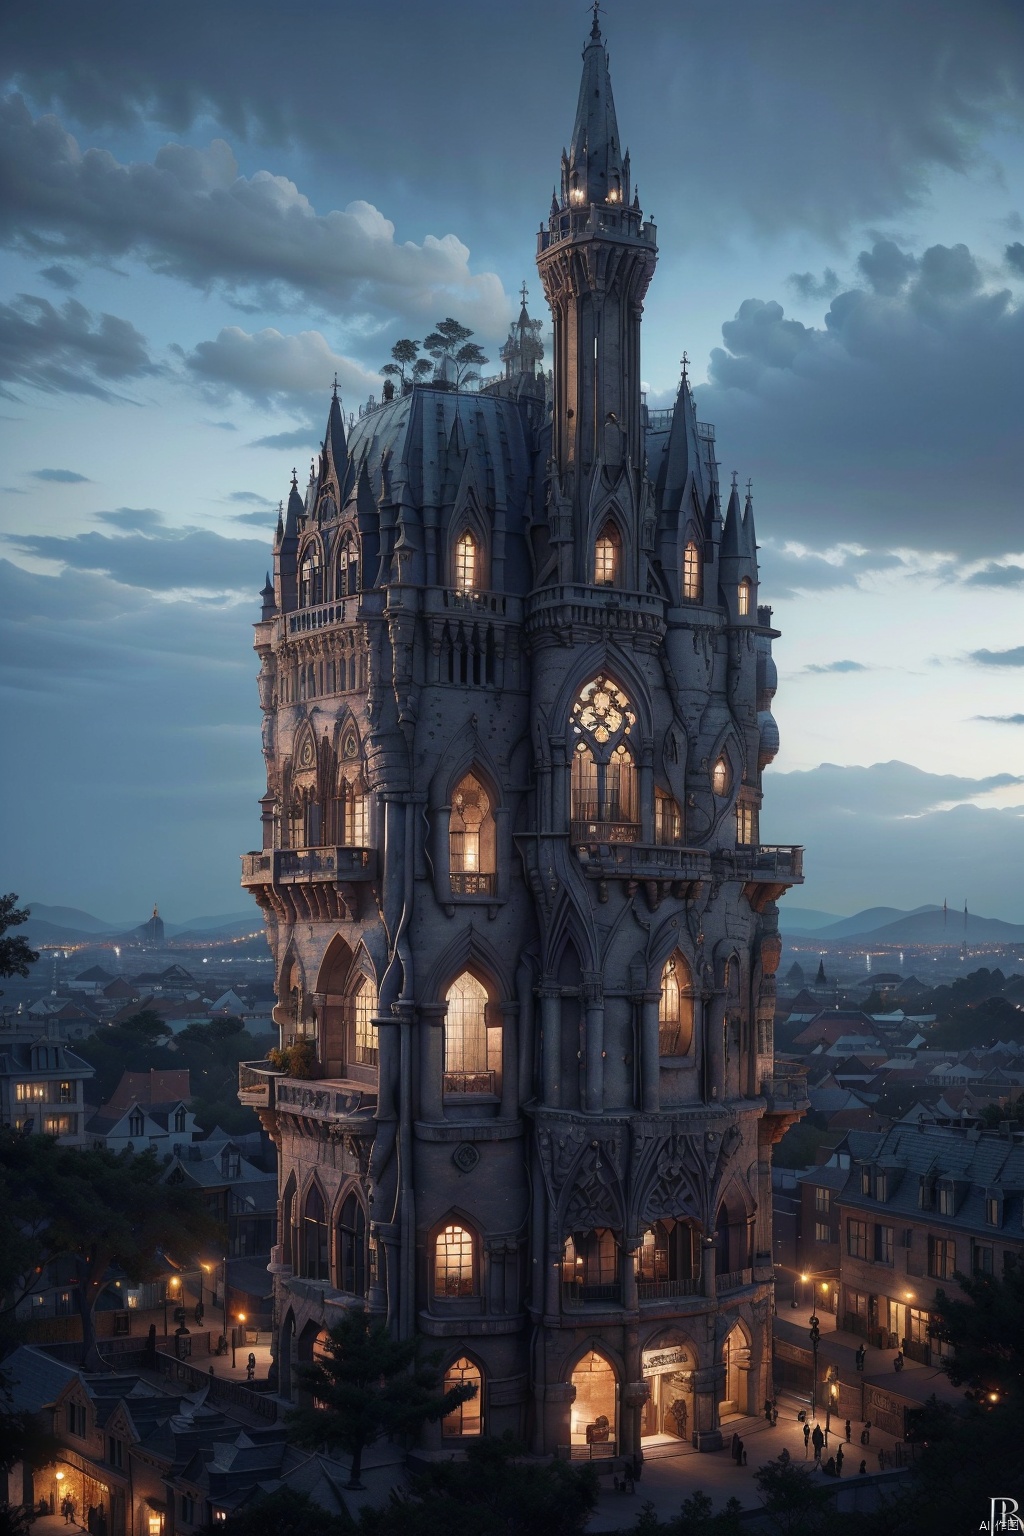  Architectural rendering, architectural design, Rock architecture, Rock buildings, sky, day, tree, blue sky, no humans, scenery, building, lighting, balcony, French window, room, city, Installation Art, gothichorrorai